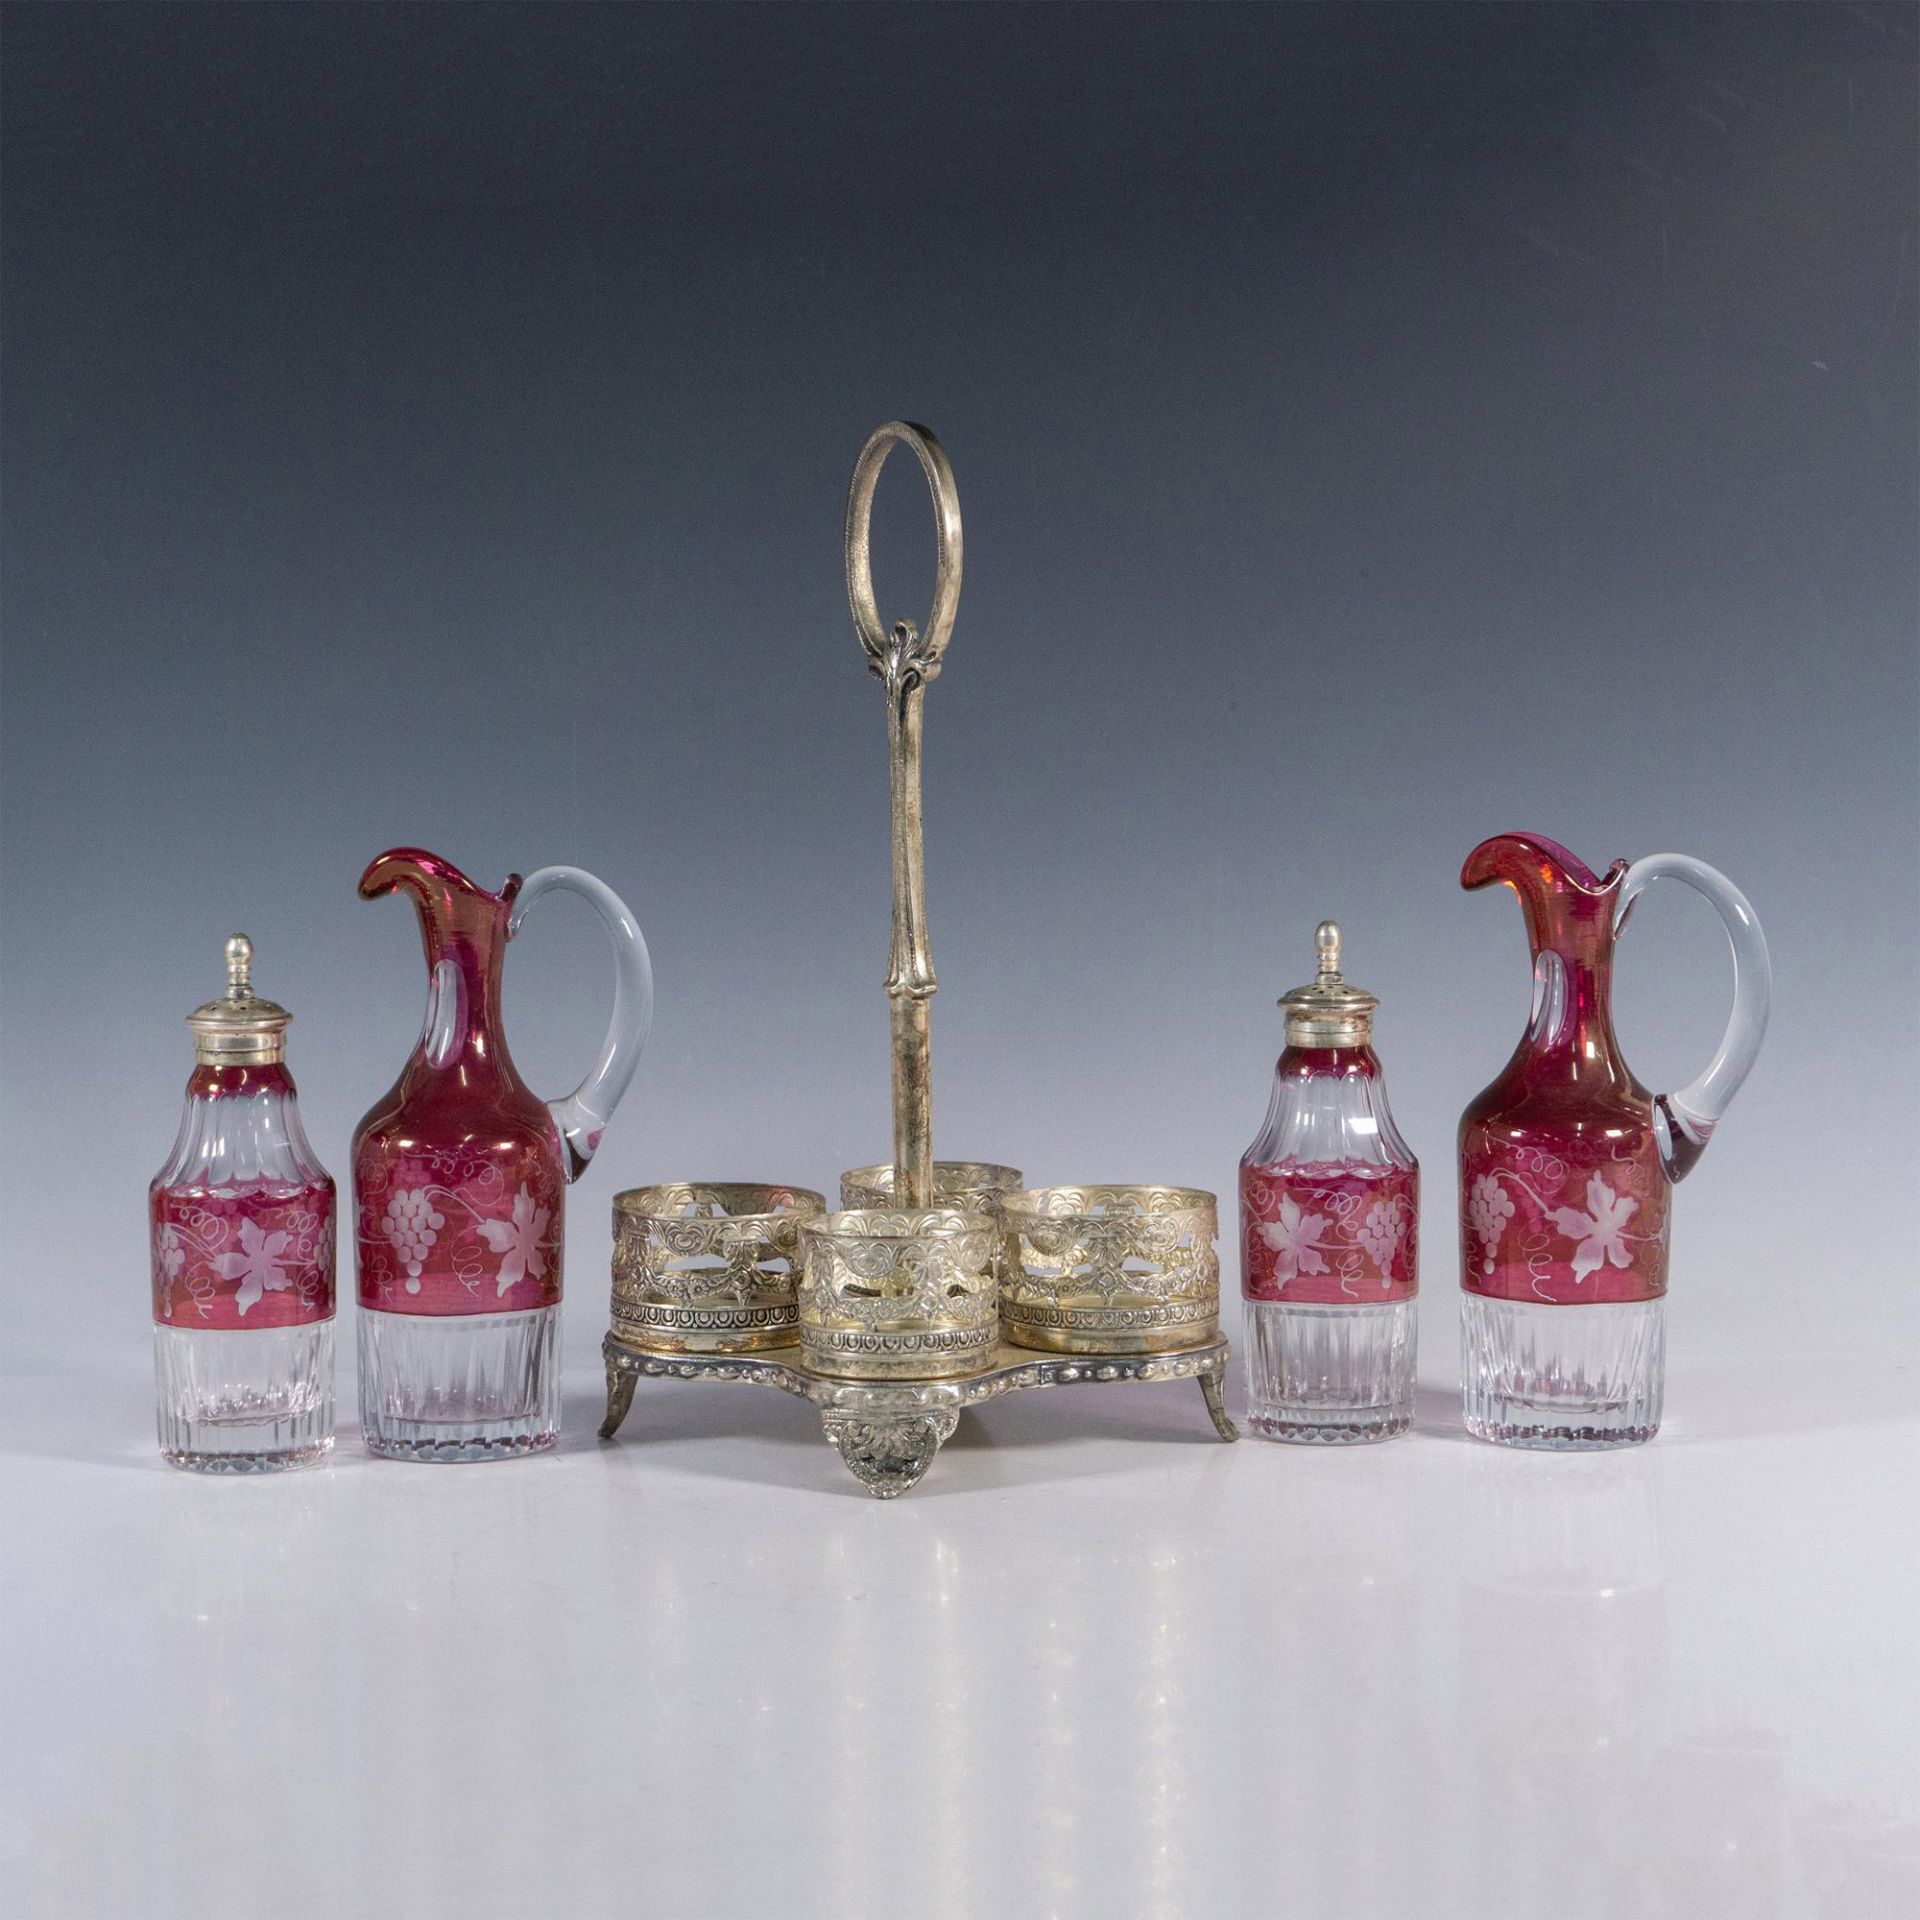 5pc Silver Metal Art Glass Condiment Caddy Set - Image 3 of 4